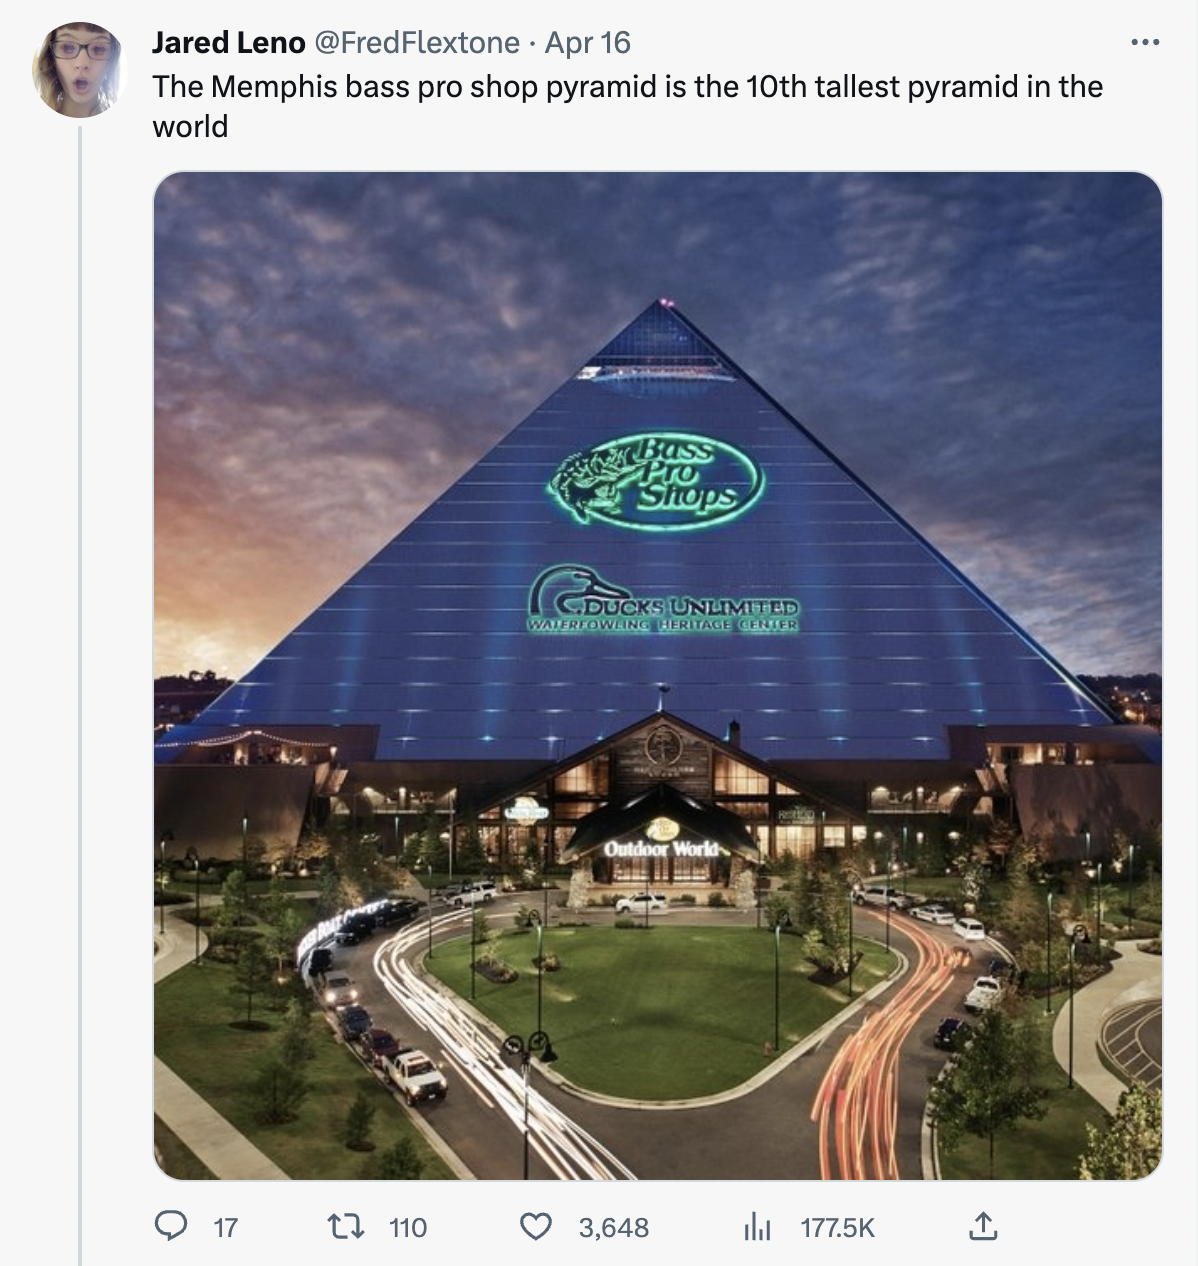 Twitter Shares facts - the lookout at the pyramid -The Memphis bass pro shop pyramid is the 10th tallest pyramid in the world 17 1 110 Briss Pro Shops Duck Unlimiter Outdoor 3,648 il 1